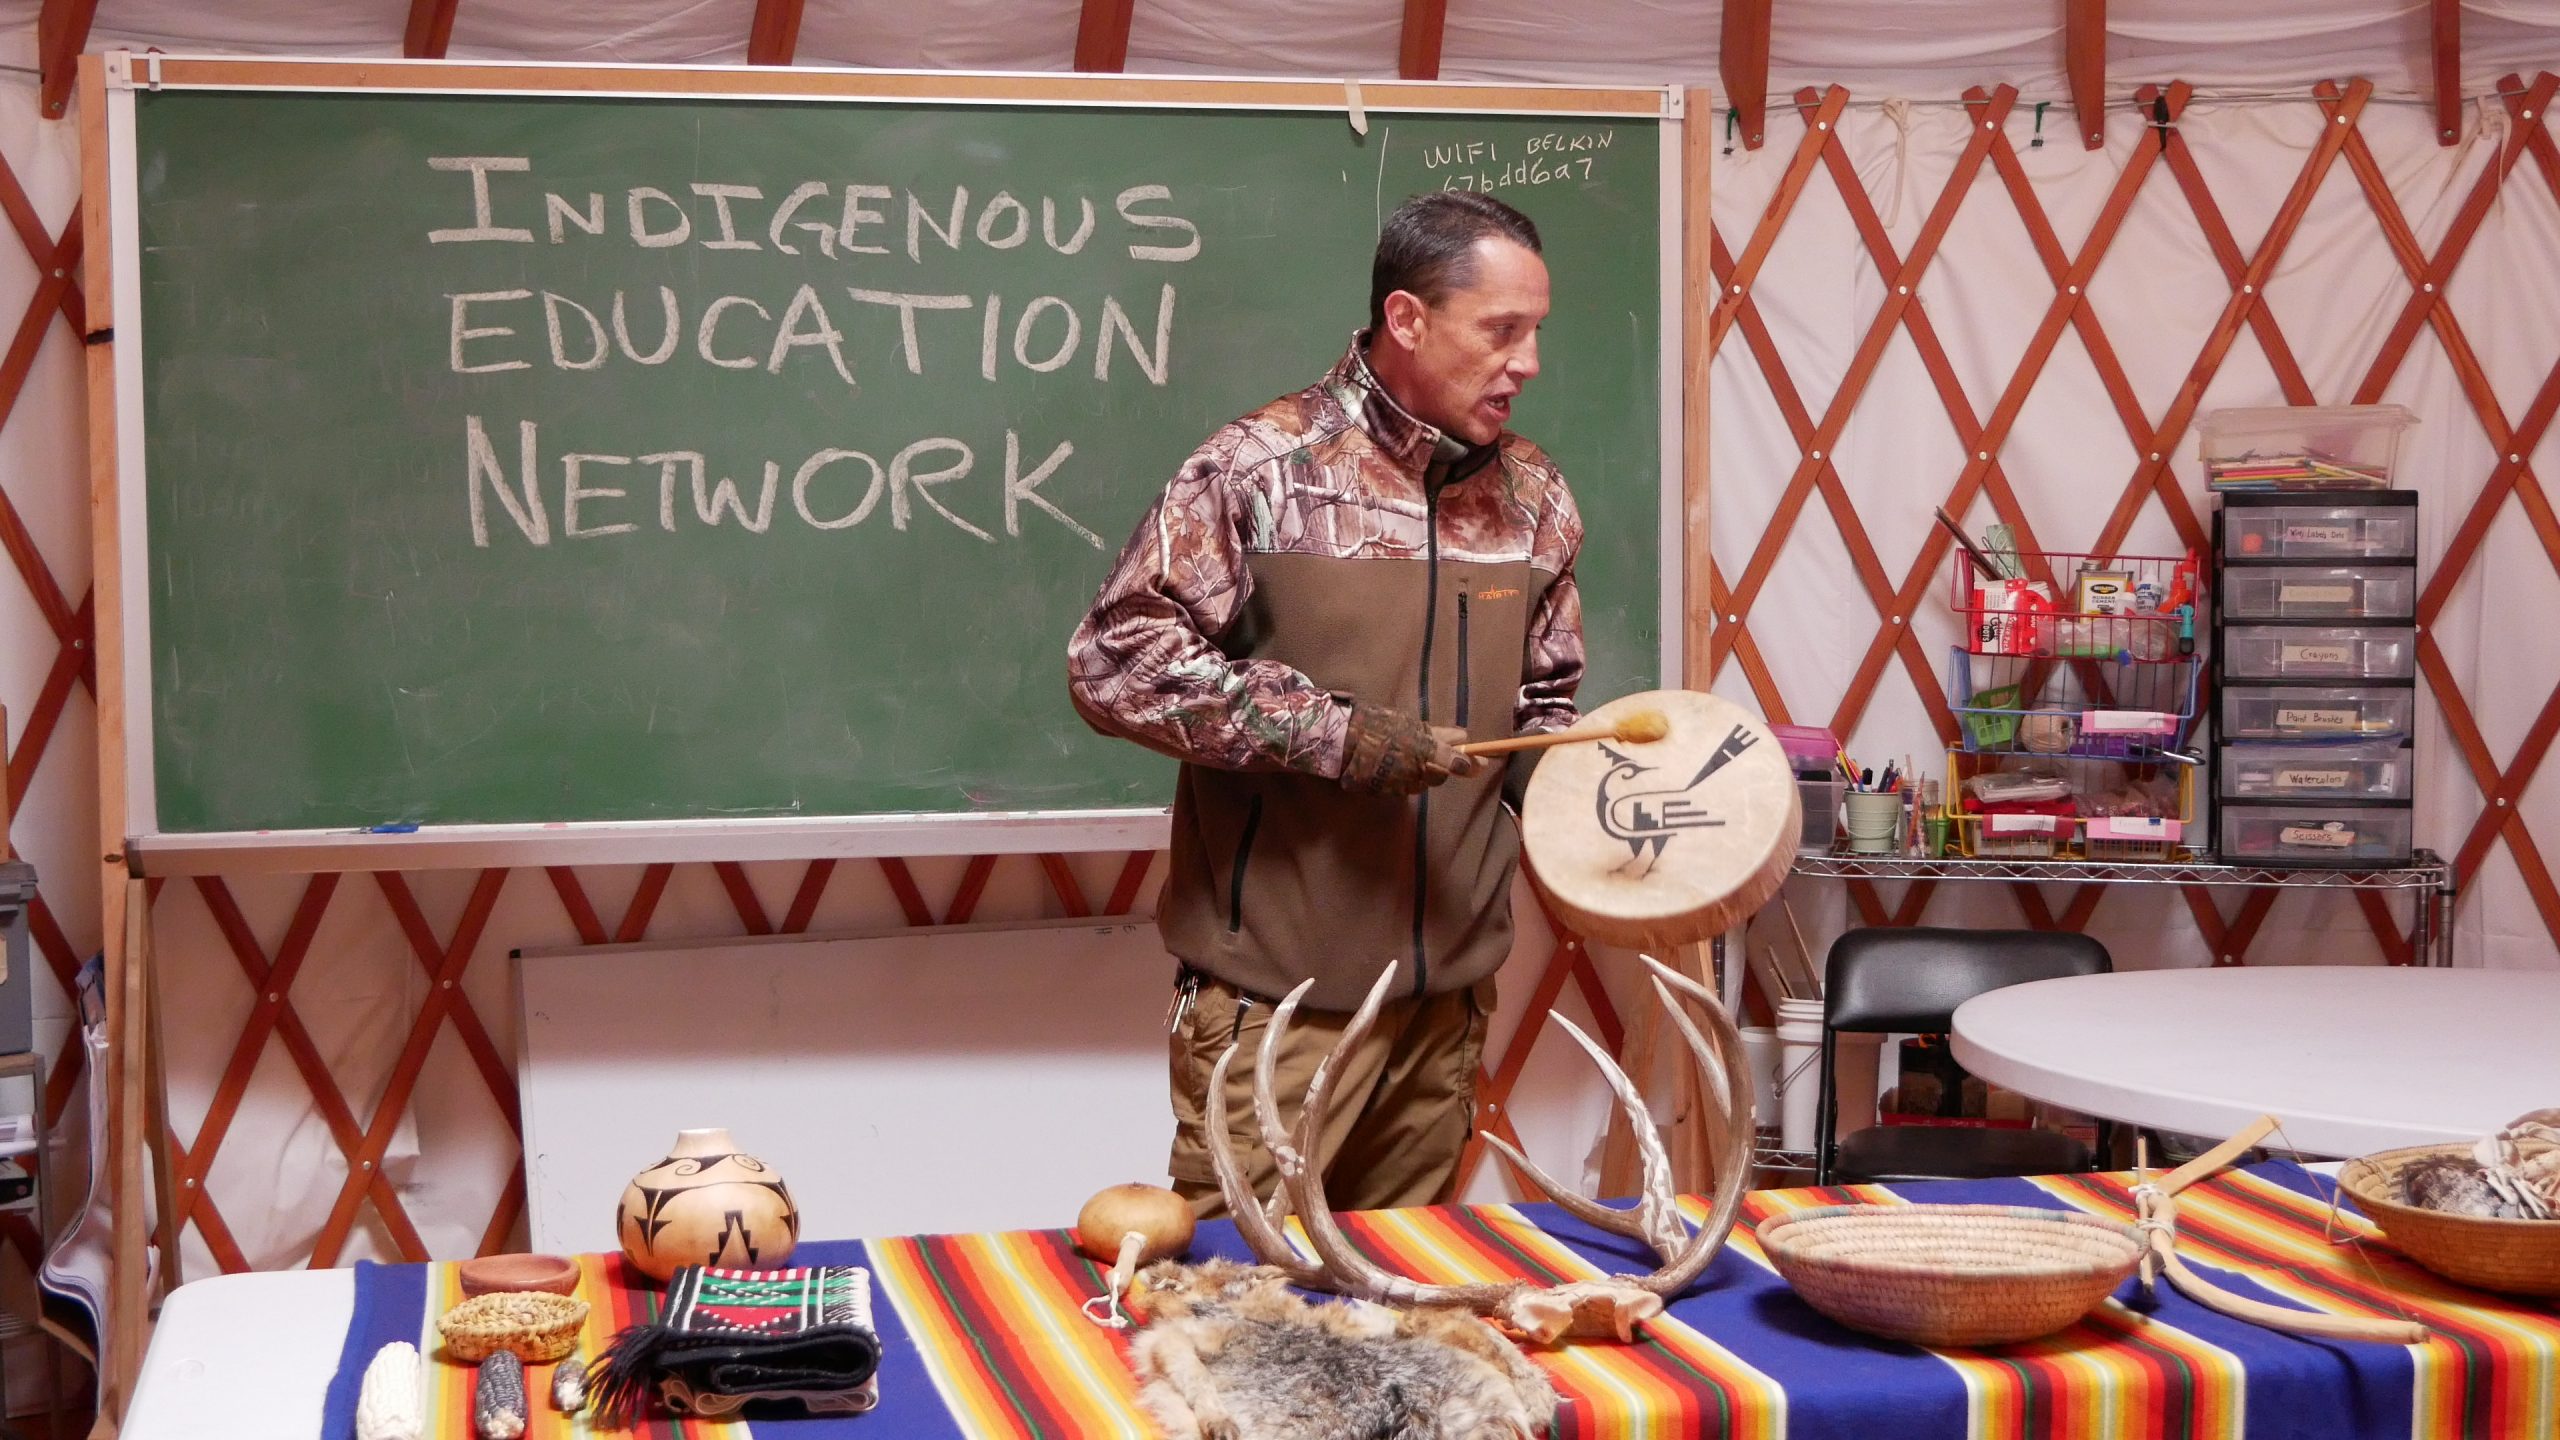 Image depicts an instructor of the Indigenous Education Network teaching a class.